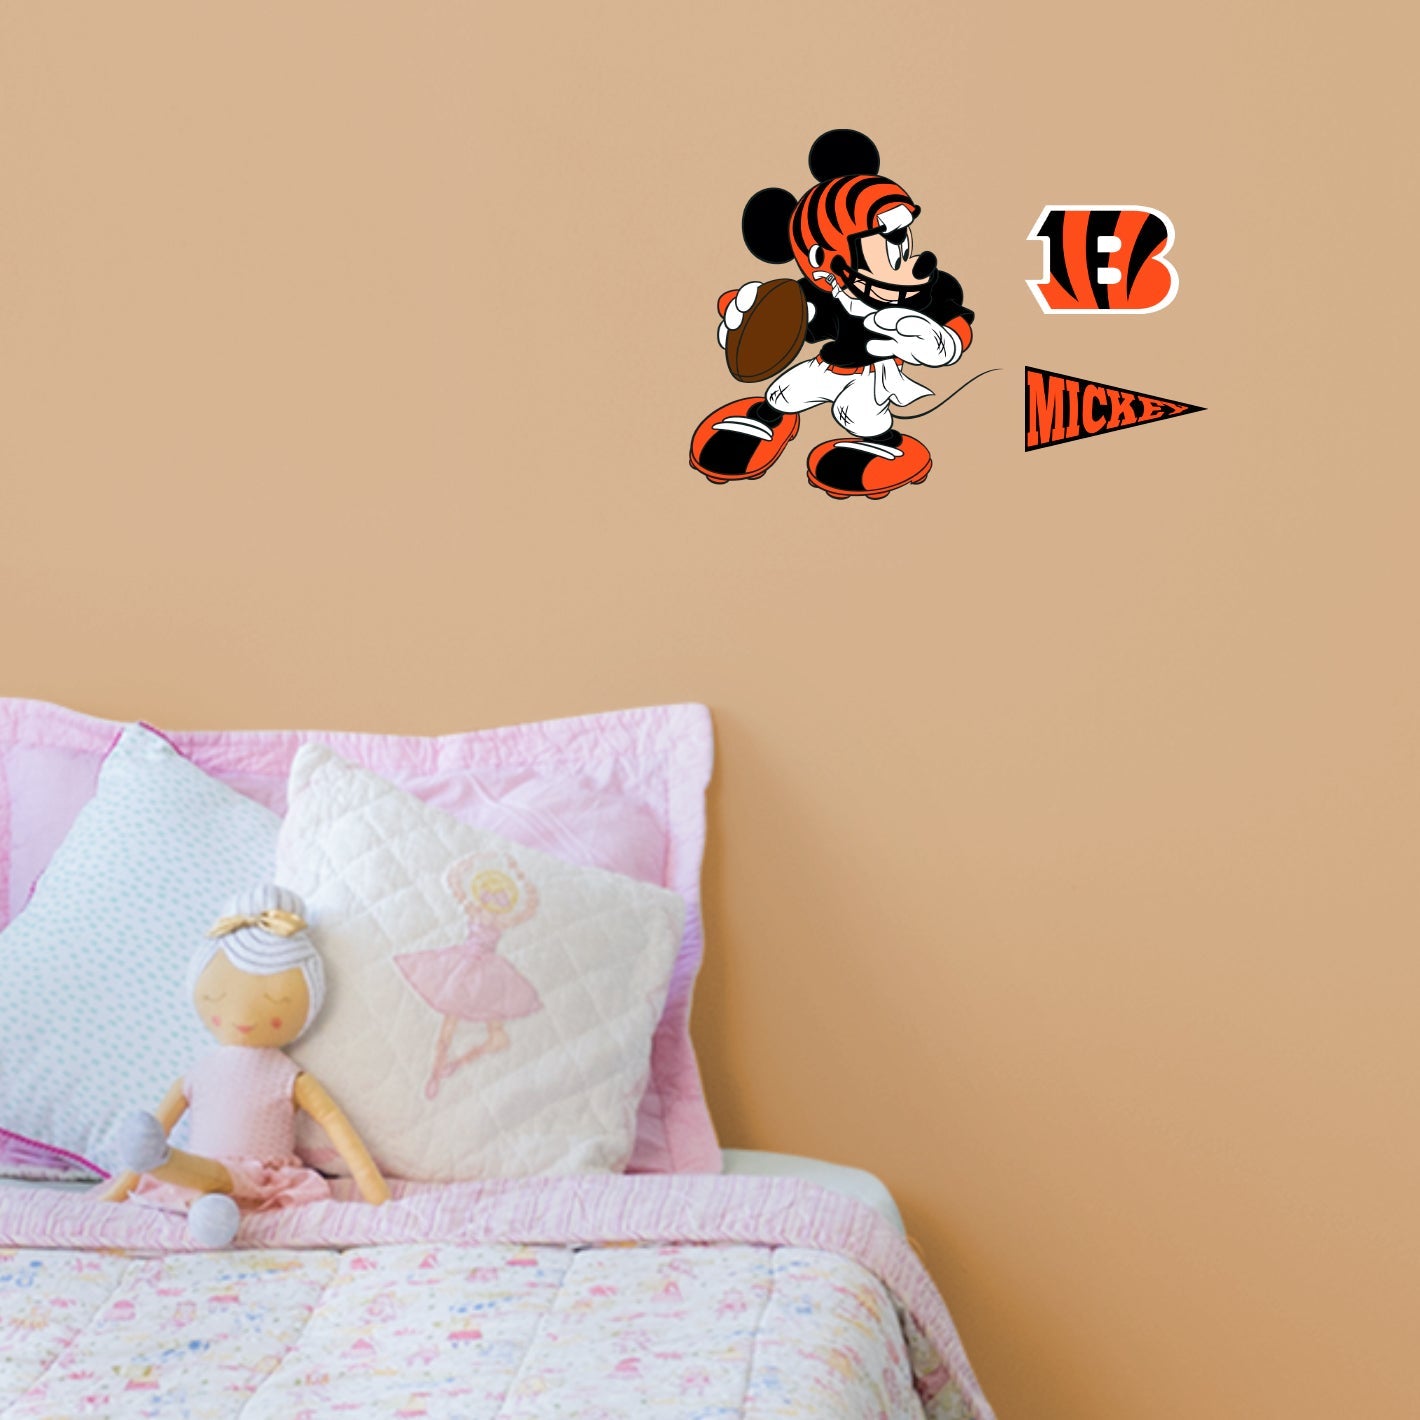 Cincinnati Bengals: Mickey Mouse - Officially Licensed NFL Removable Adhesive Decal